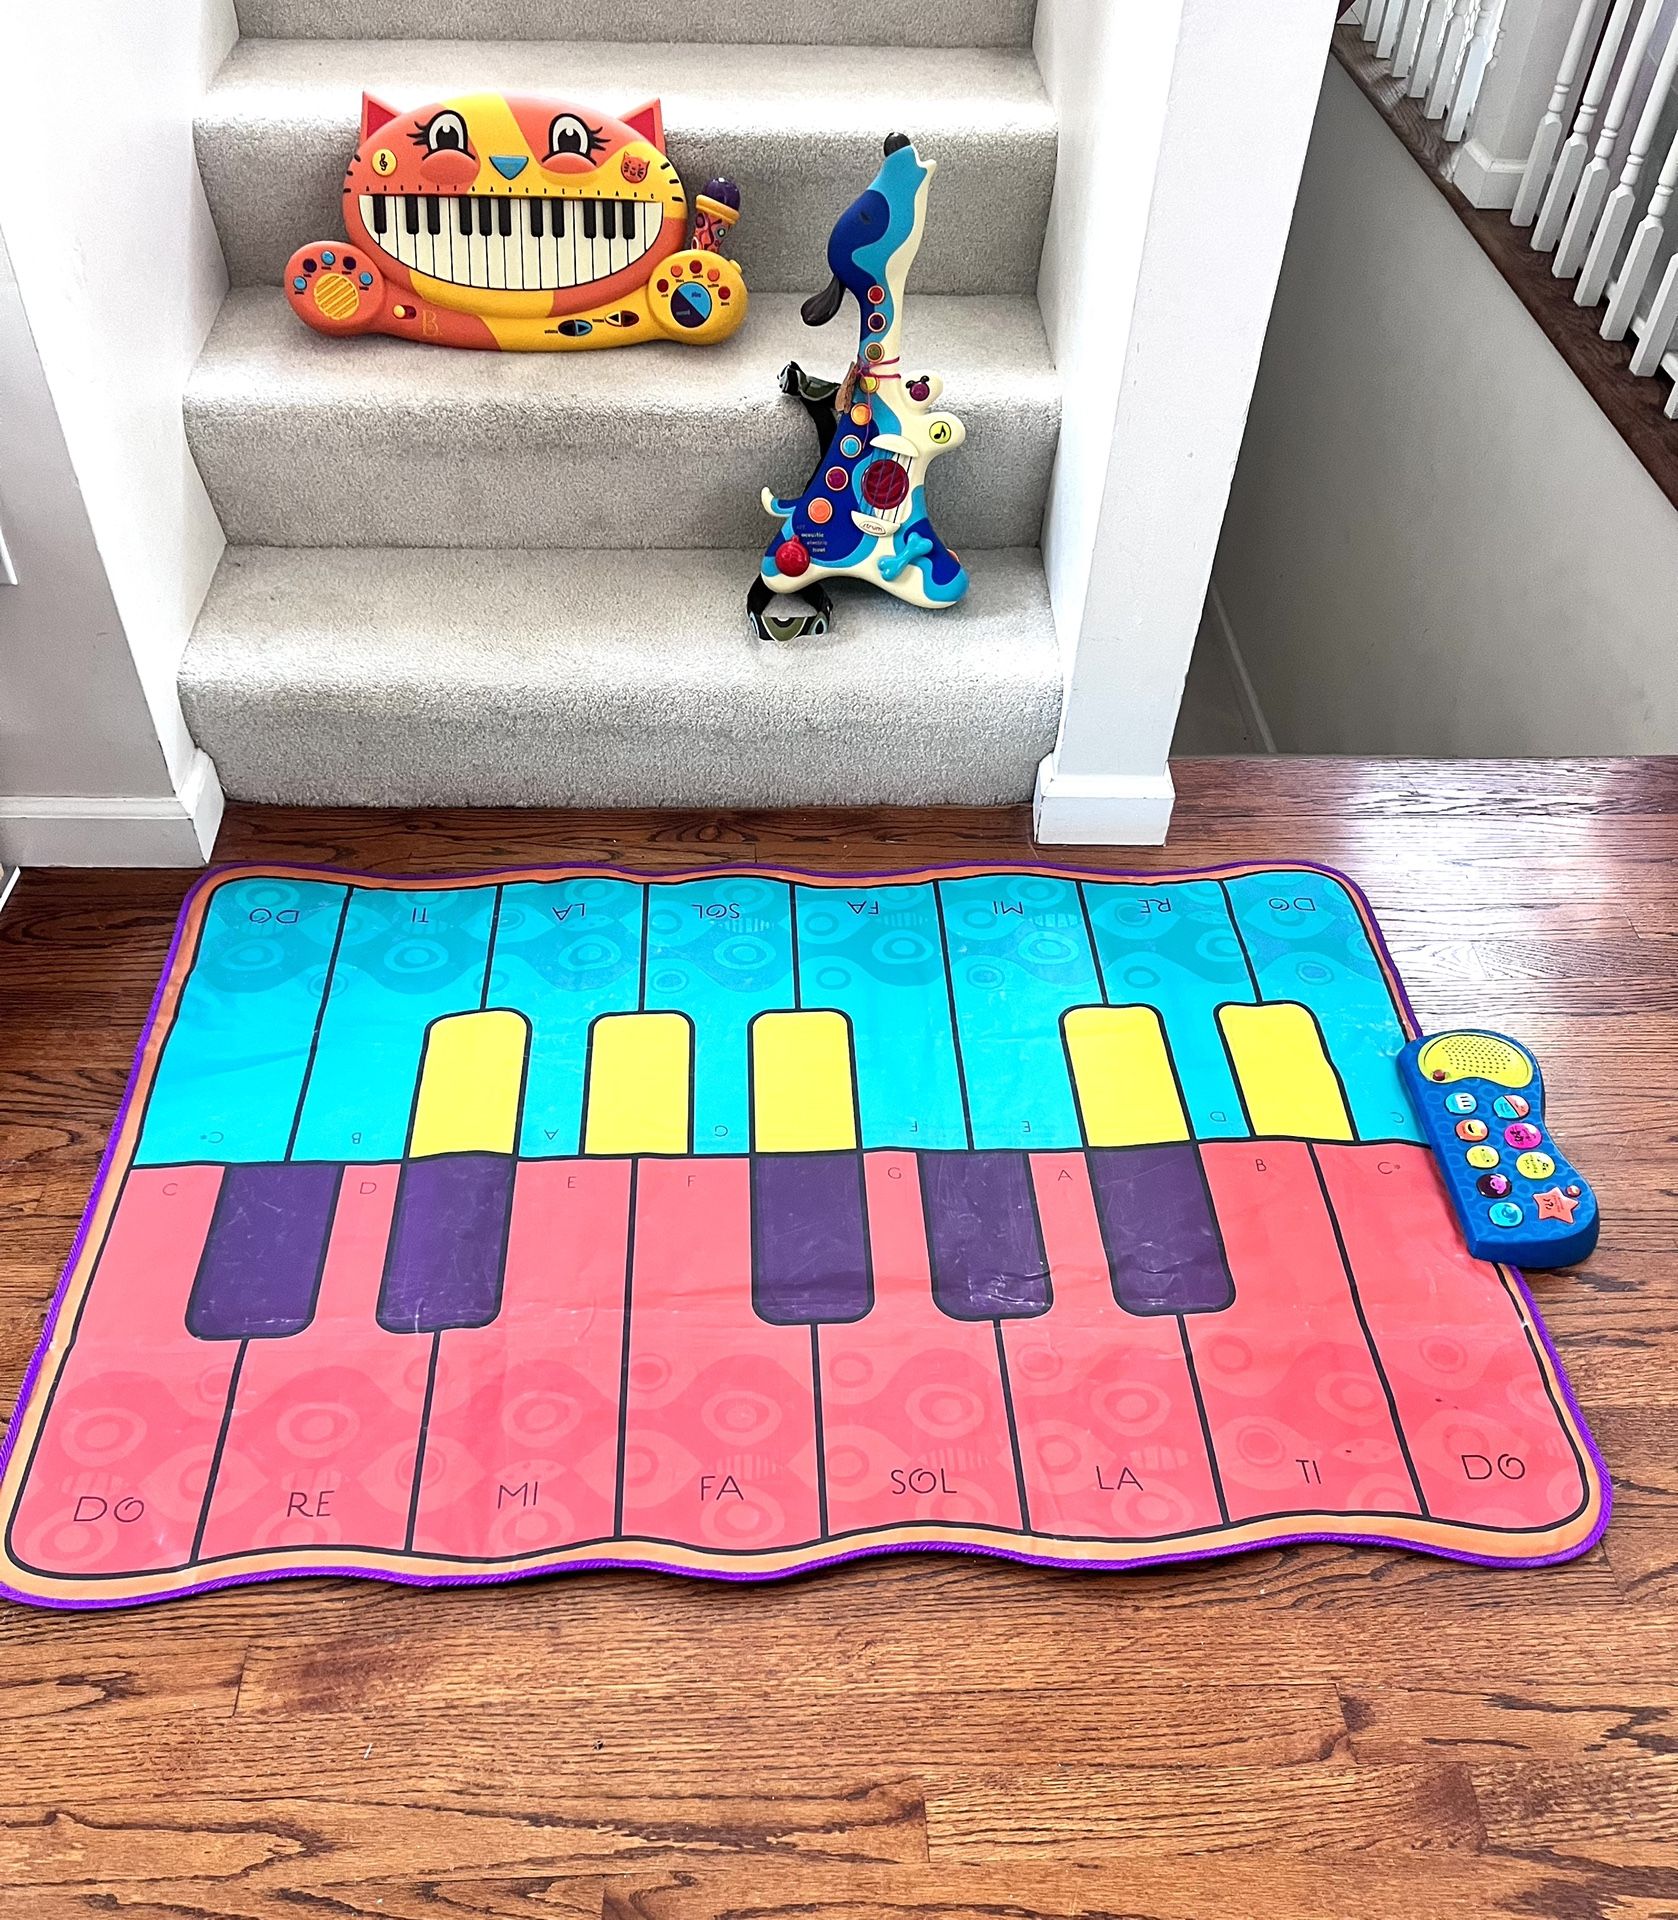 https://offerup.com/redirect/?o=Qi5Ub3lz Musical Instruments And Musical Mat ($30 For All)